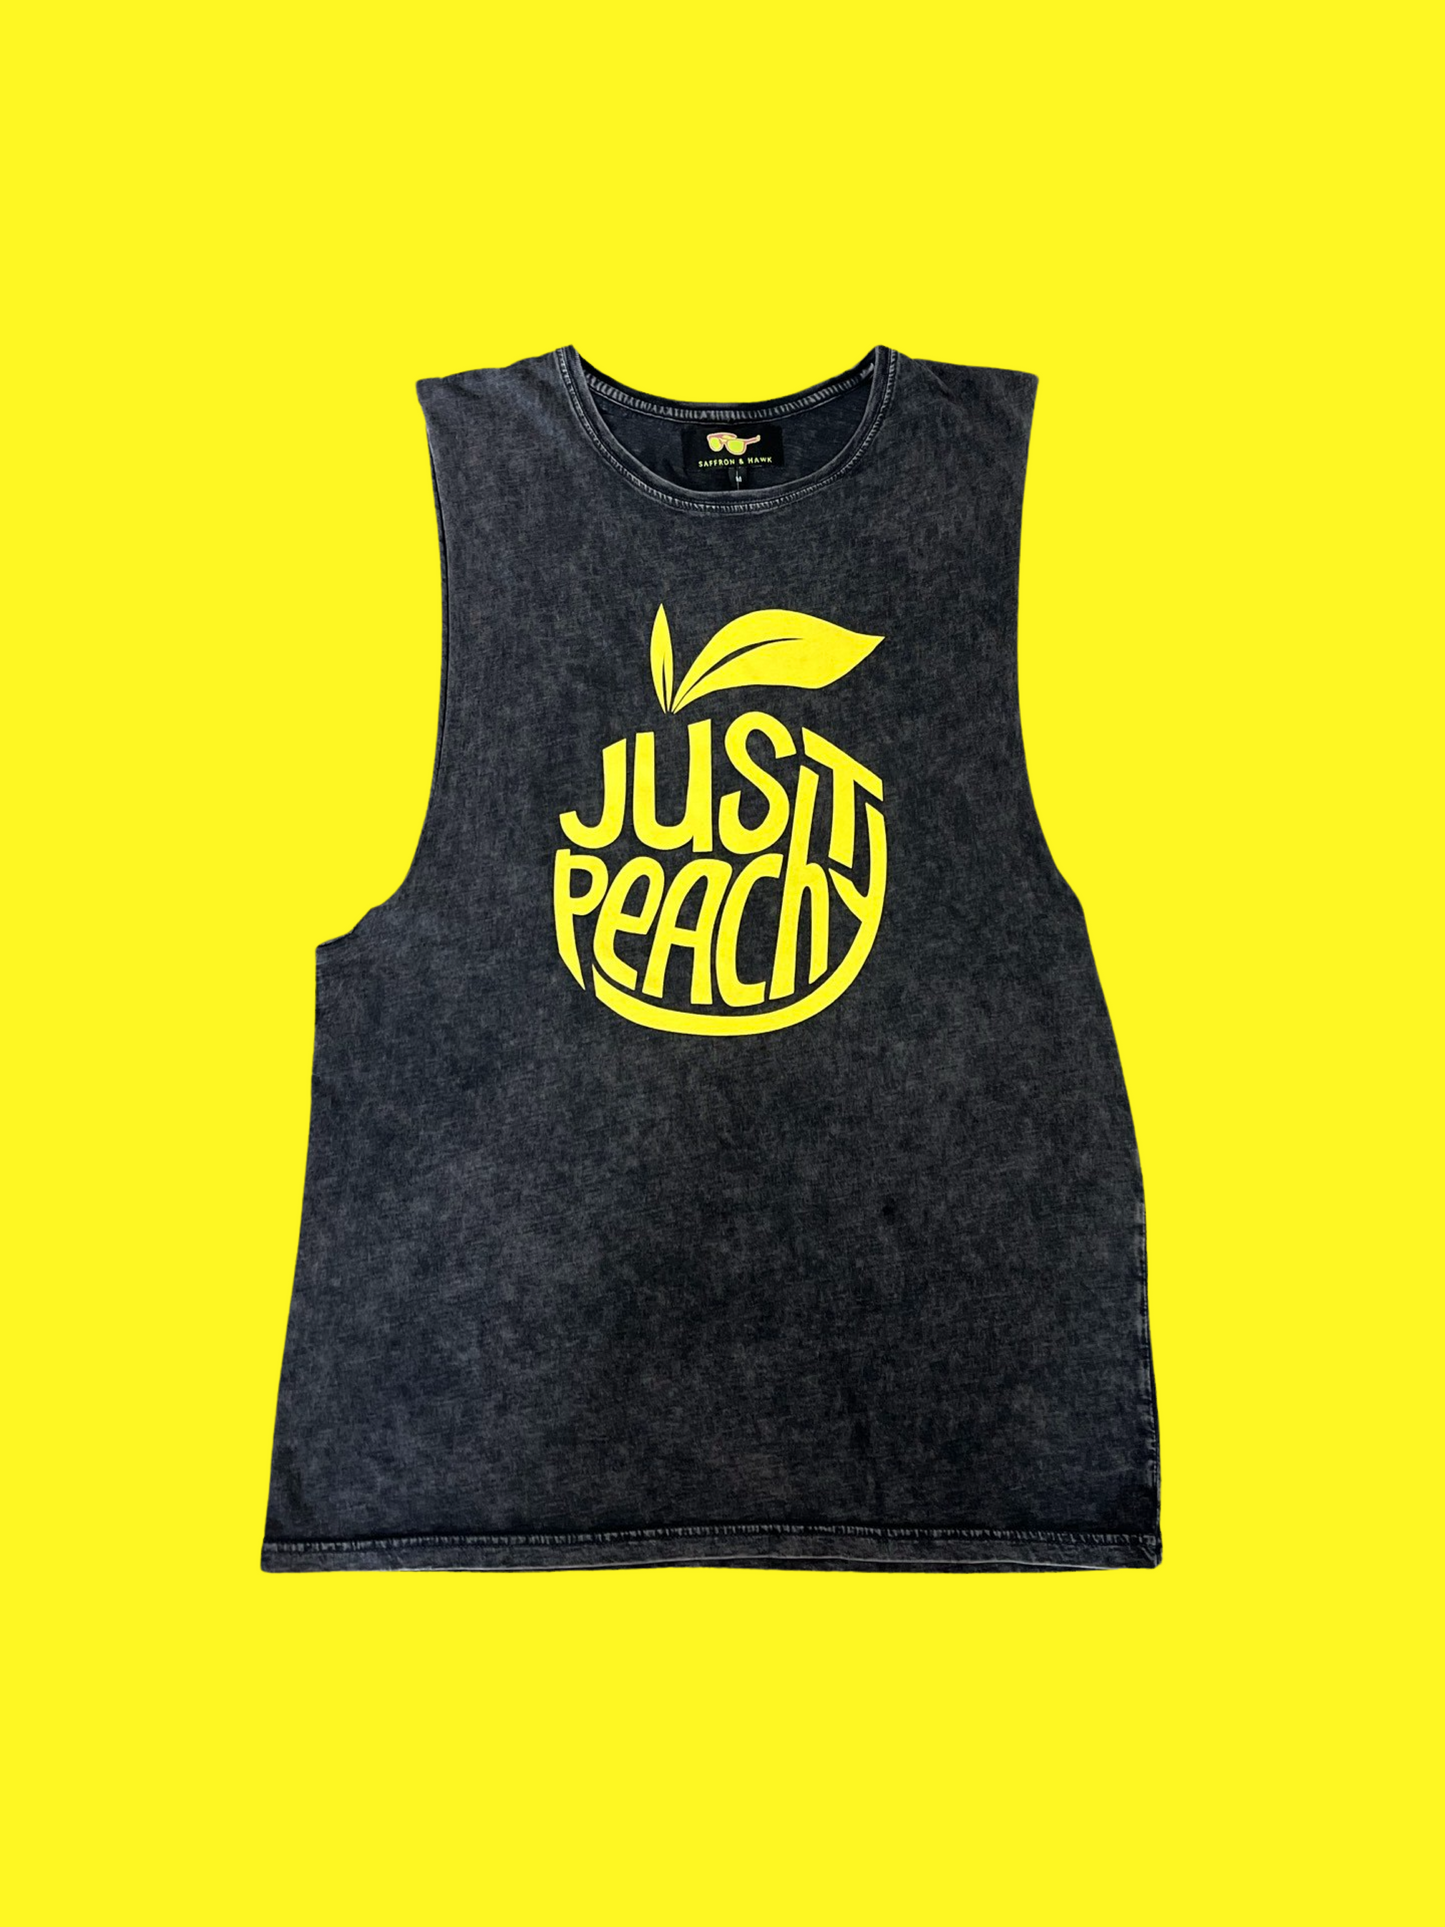 Just Peachy Tank- Stone wash black with yellow